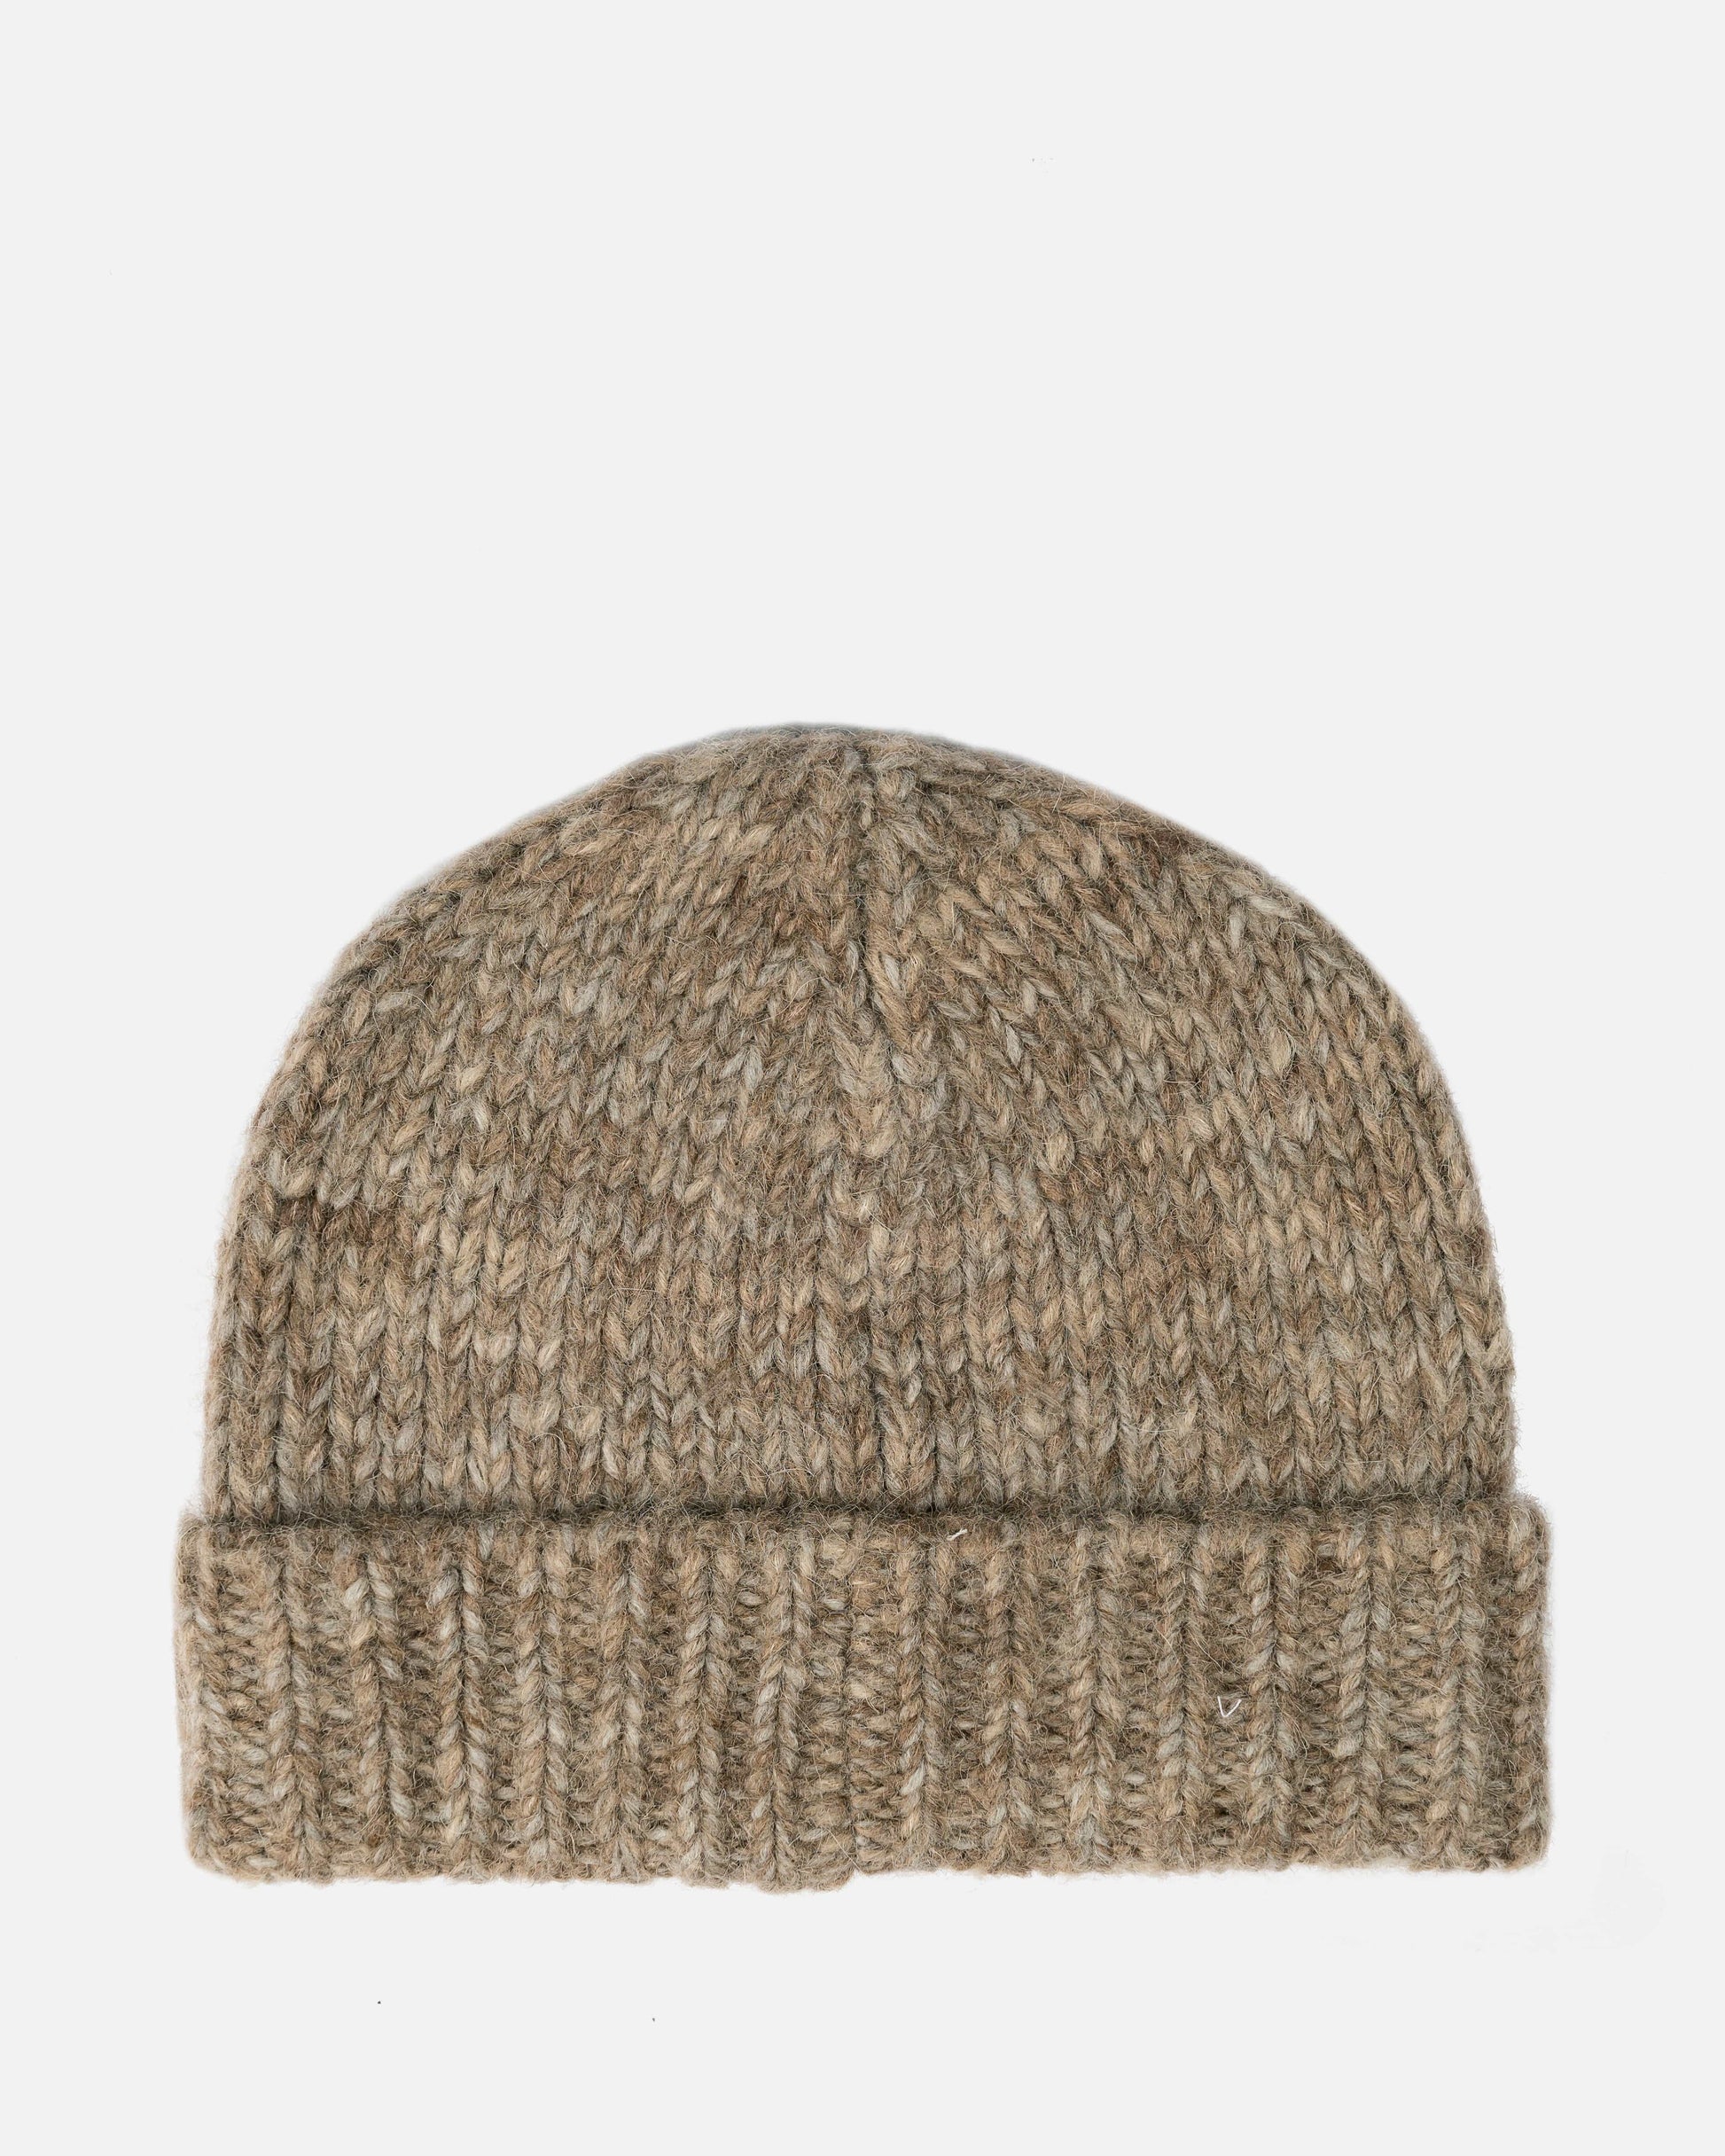 Maison Margiela Men's Hats Ribbed Beanie in Brown